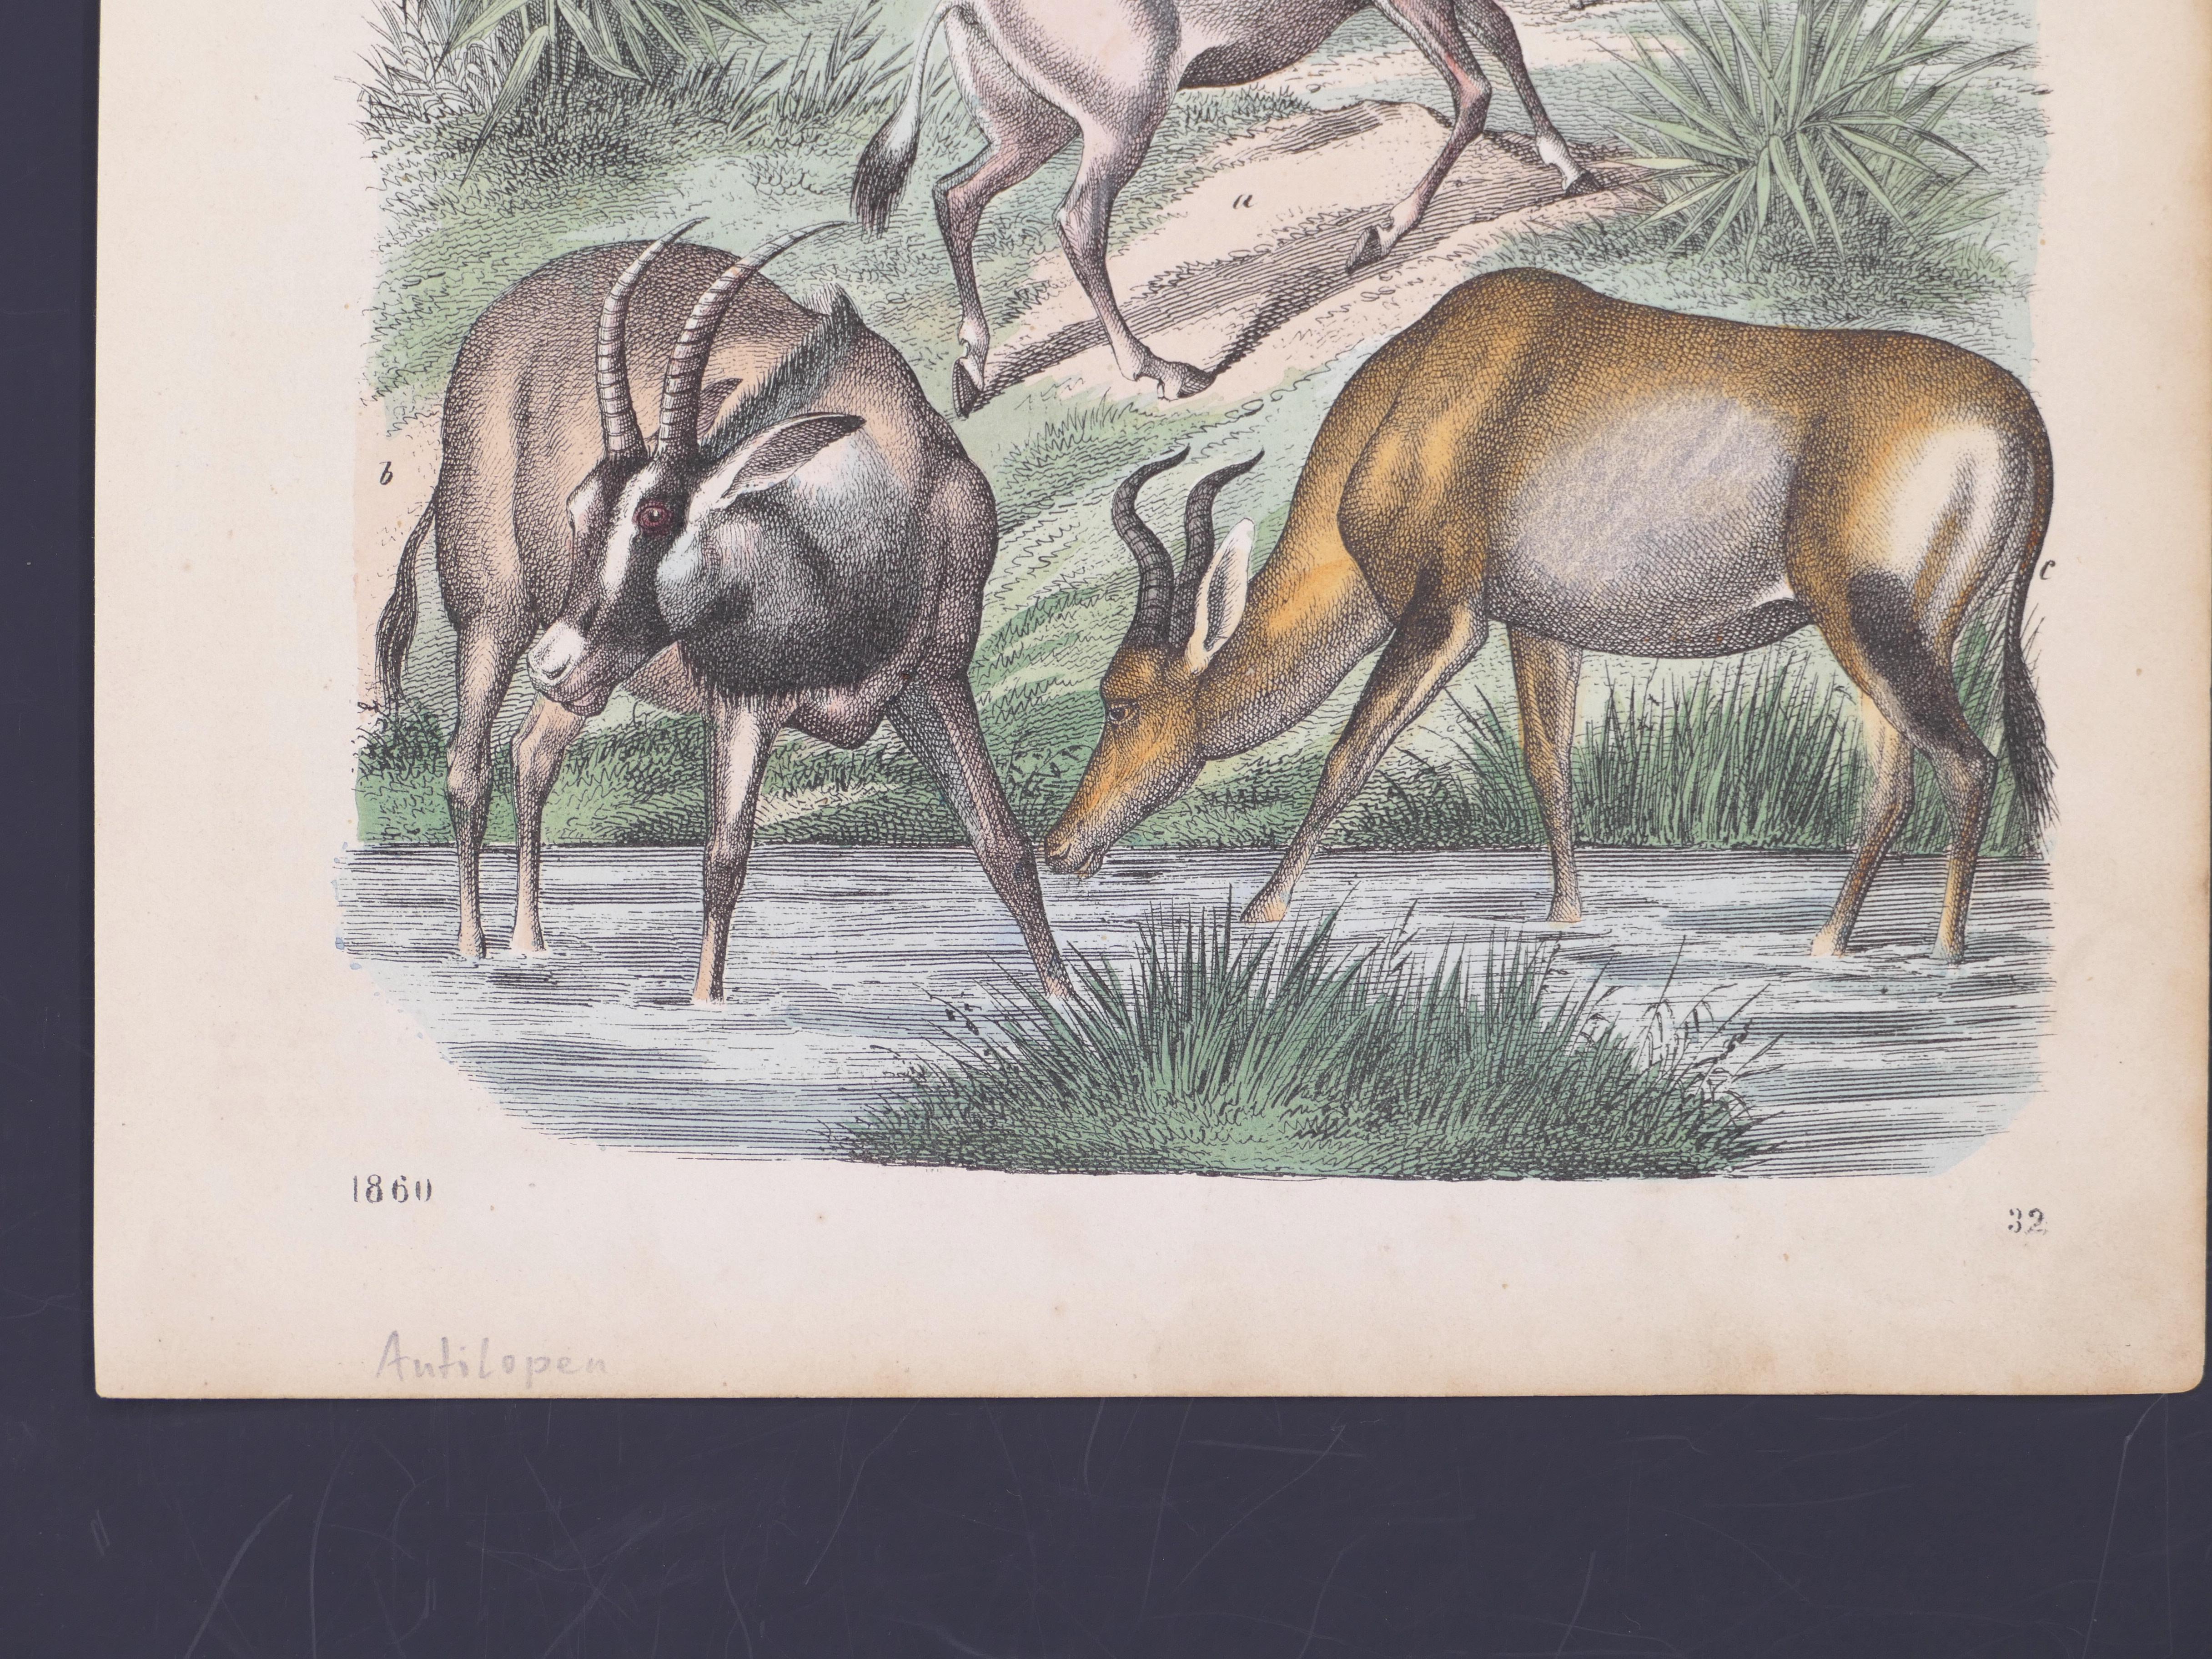 Antelopes is a color lithograph realized by an anonymous illustrator in 1860.

Image dimensions: 21.5 x 16.5 cm.

Titled in pencil bottom left, p. 32: Antilopen. The print is in very good condition.

Here, the antelopes are shown in a natural